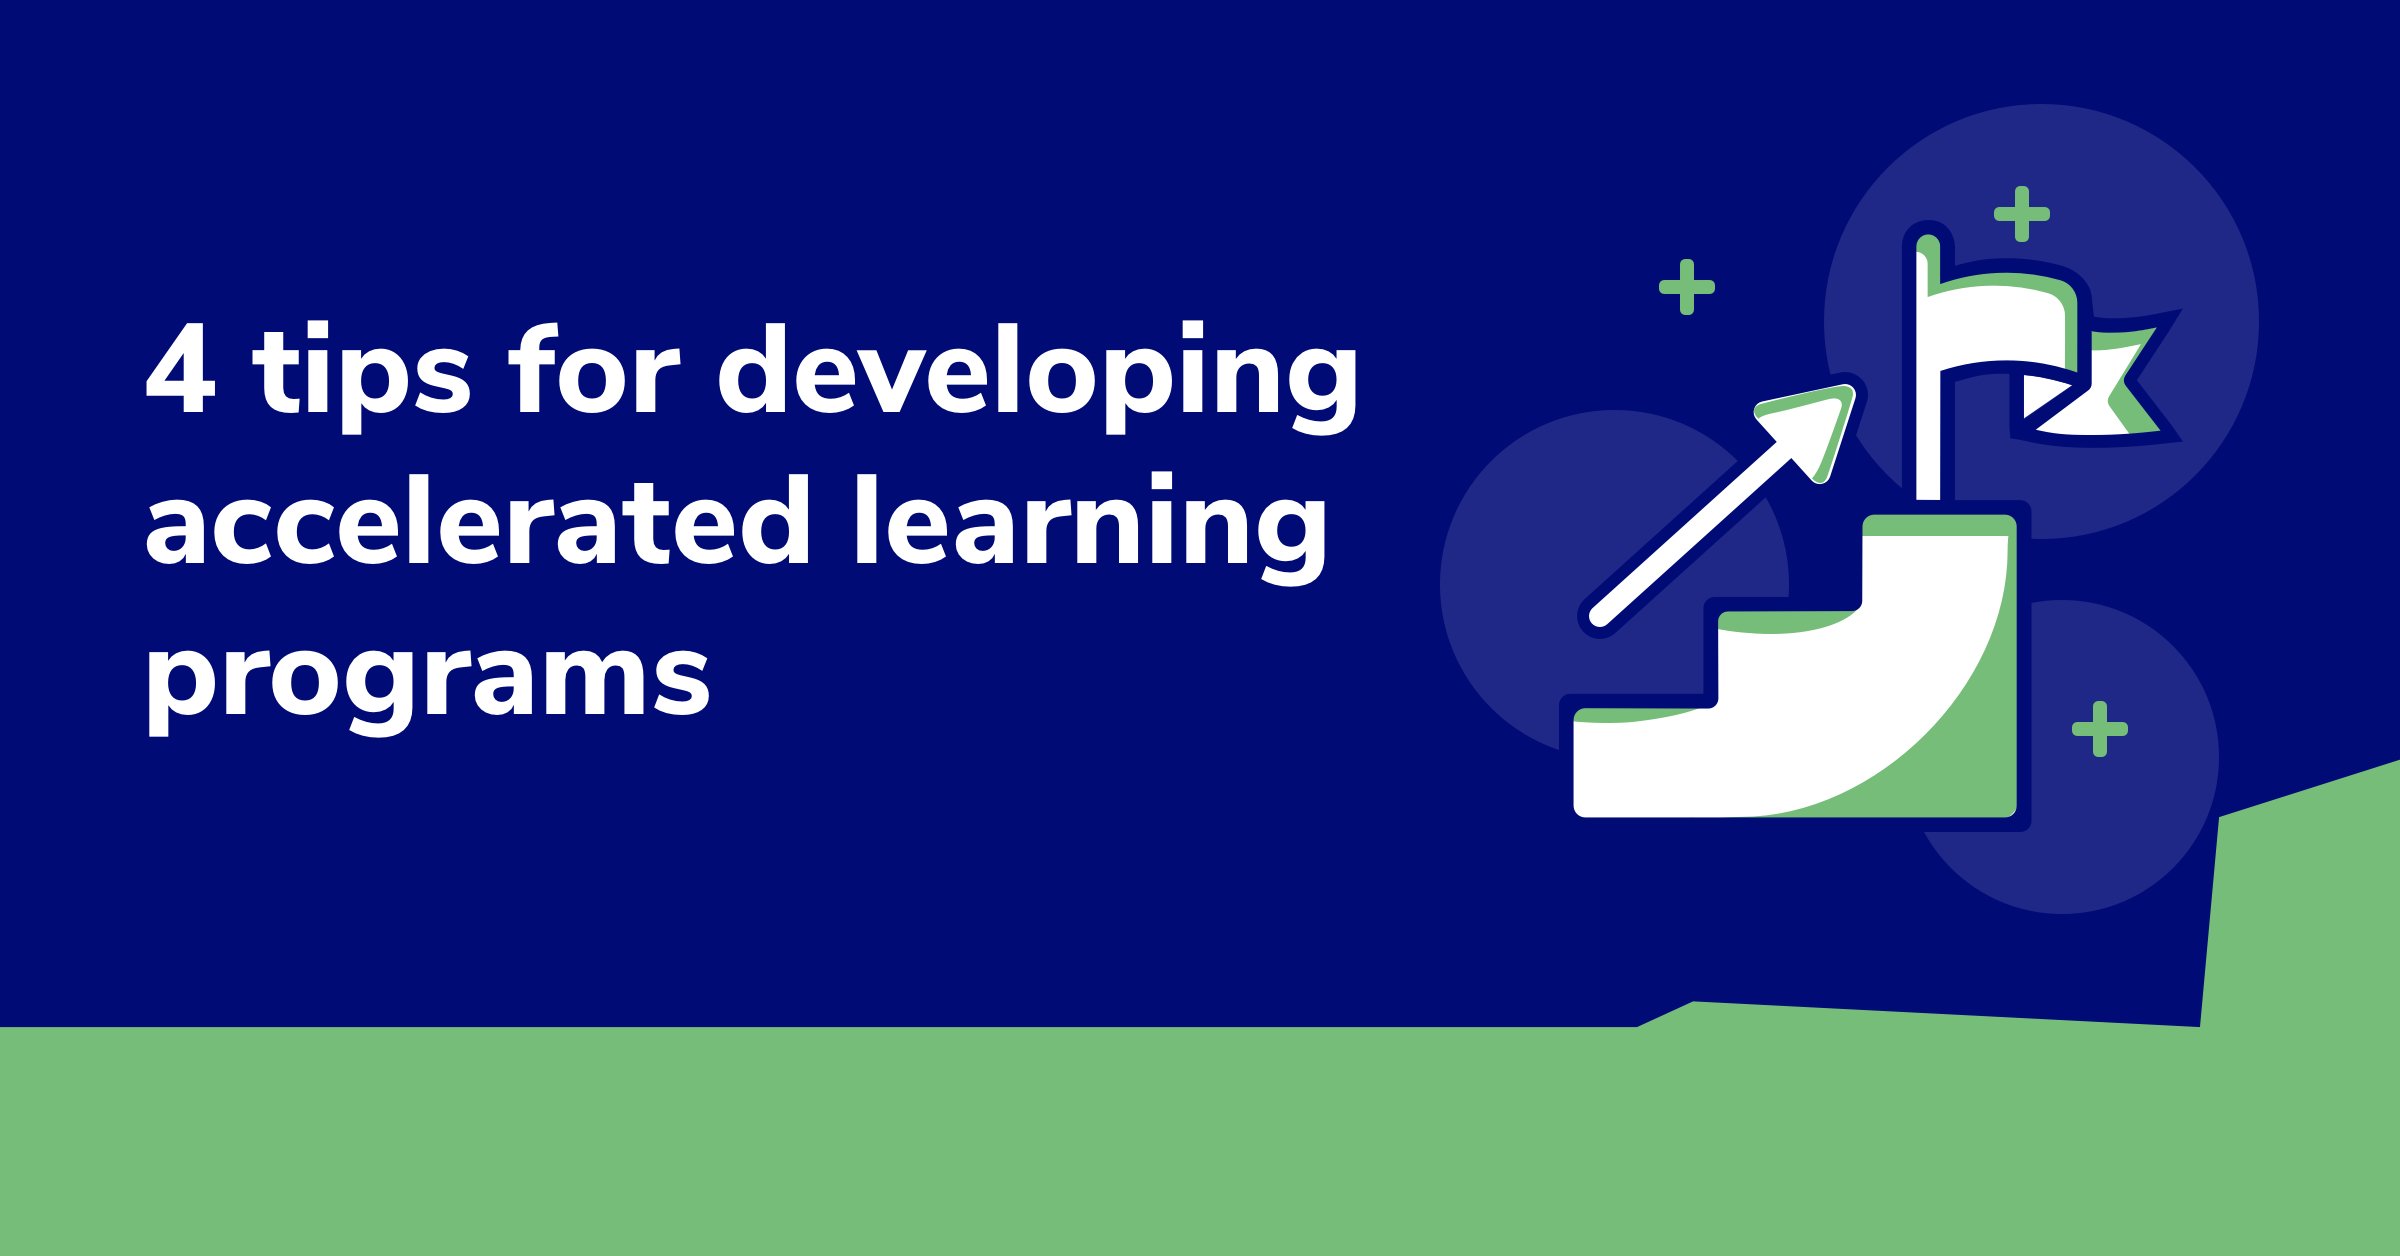 4 tips for developing accelerated learning programs